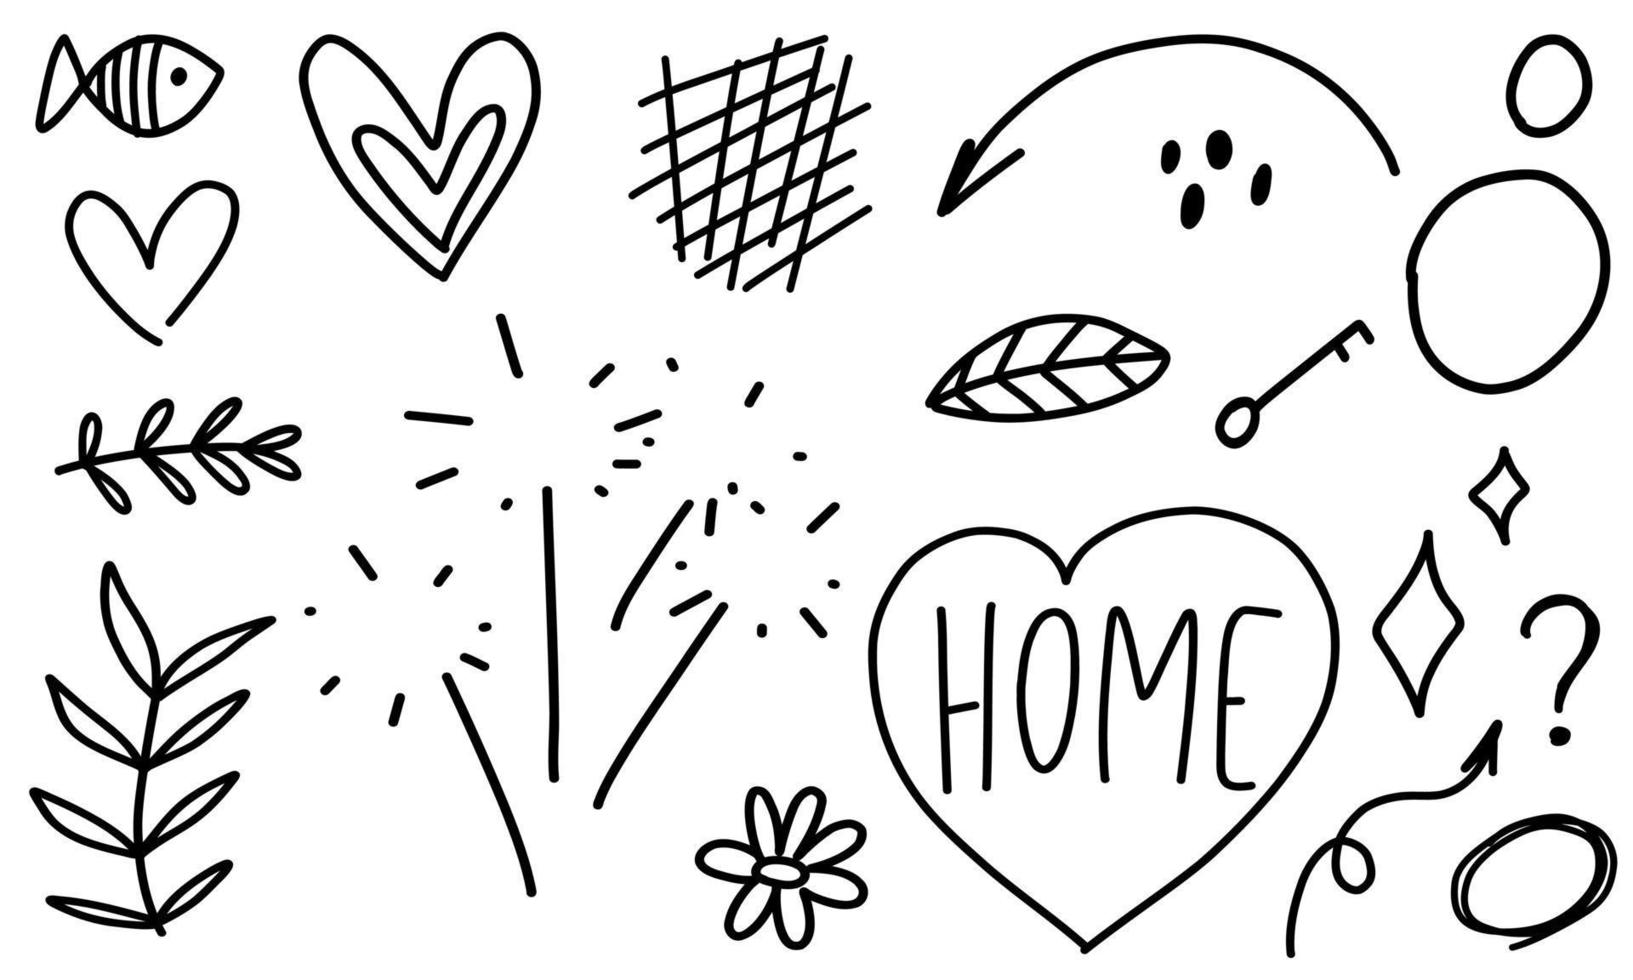 Doodle arrows, flowers, stars, hearts, branch, question, text. Sketch set cute isolated line collection for home. vector